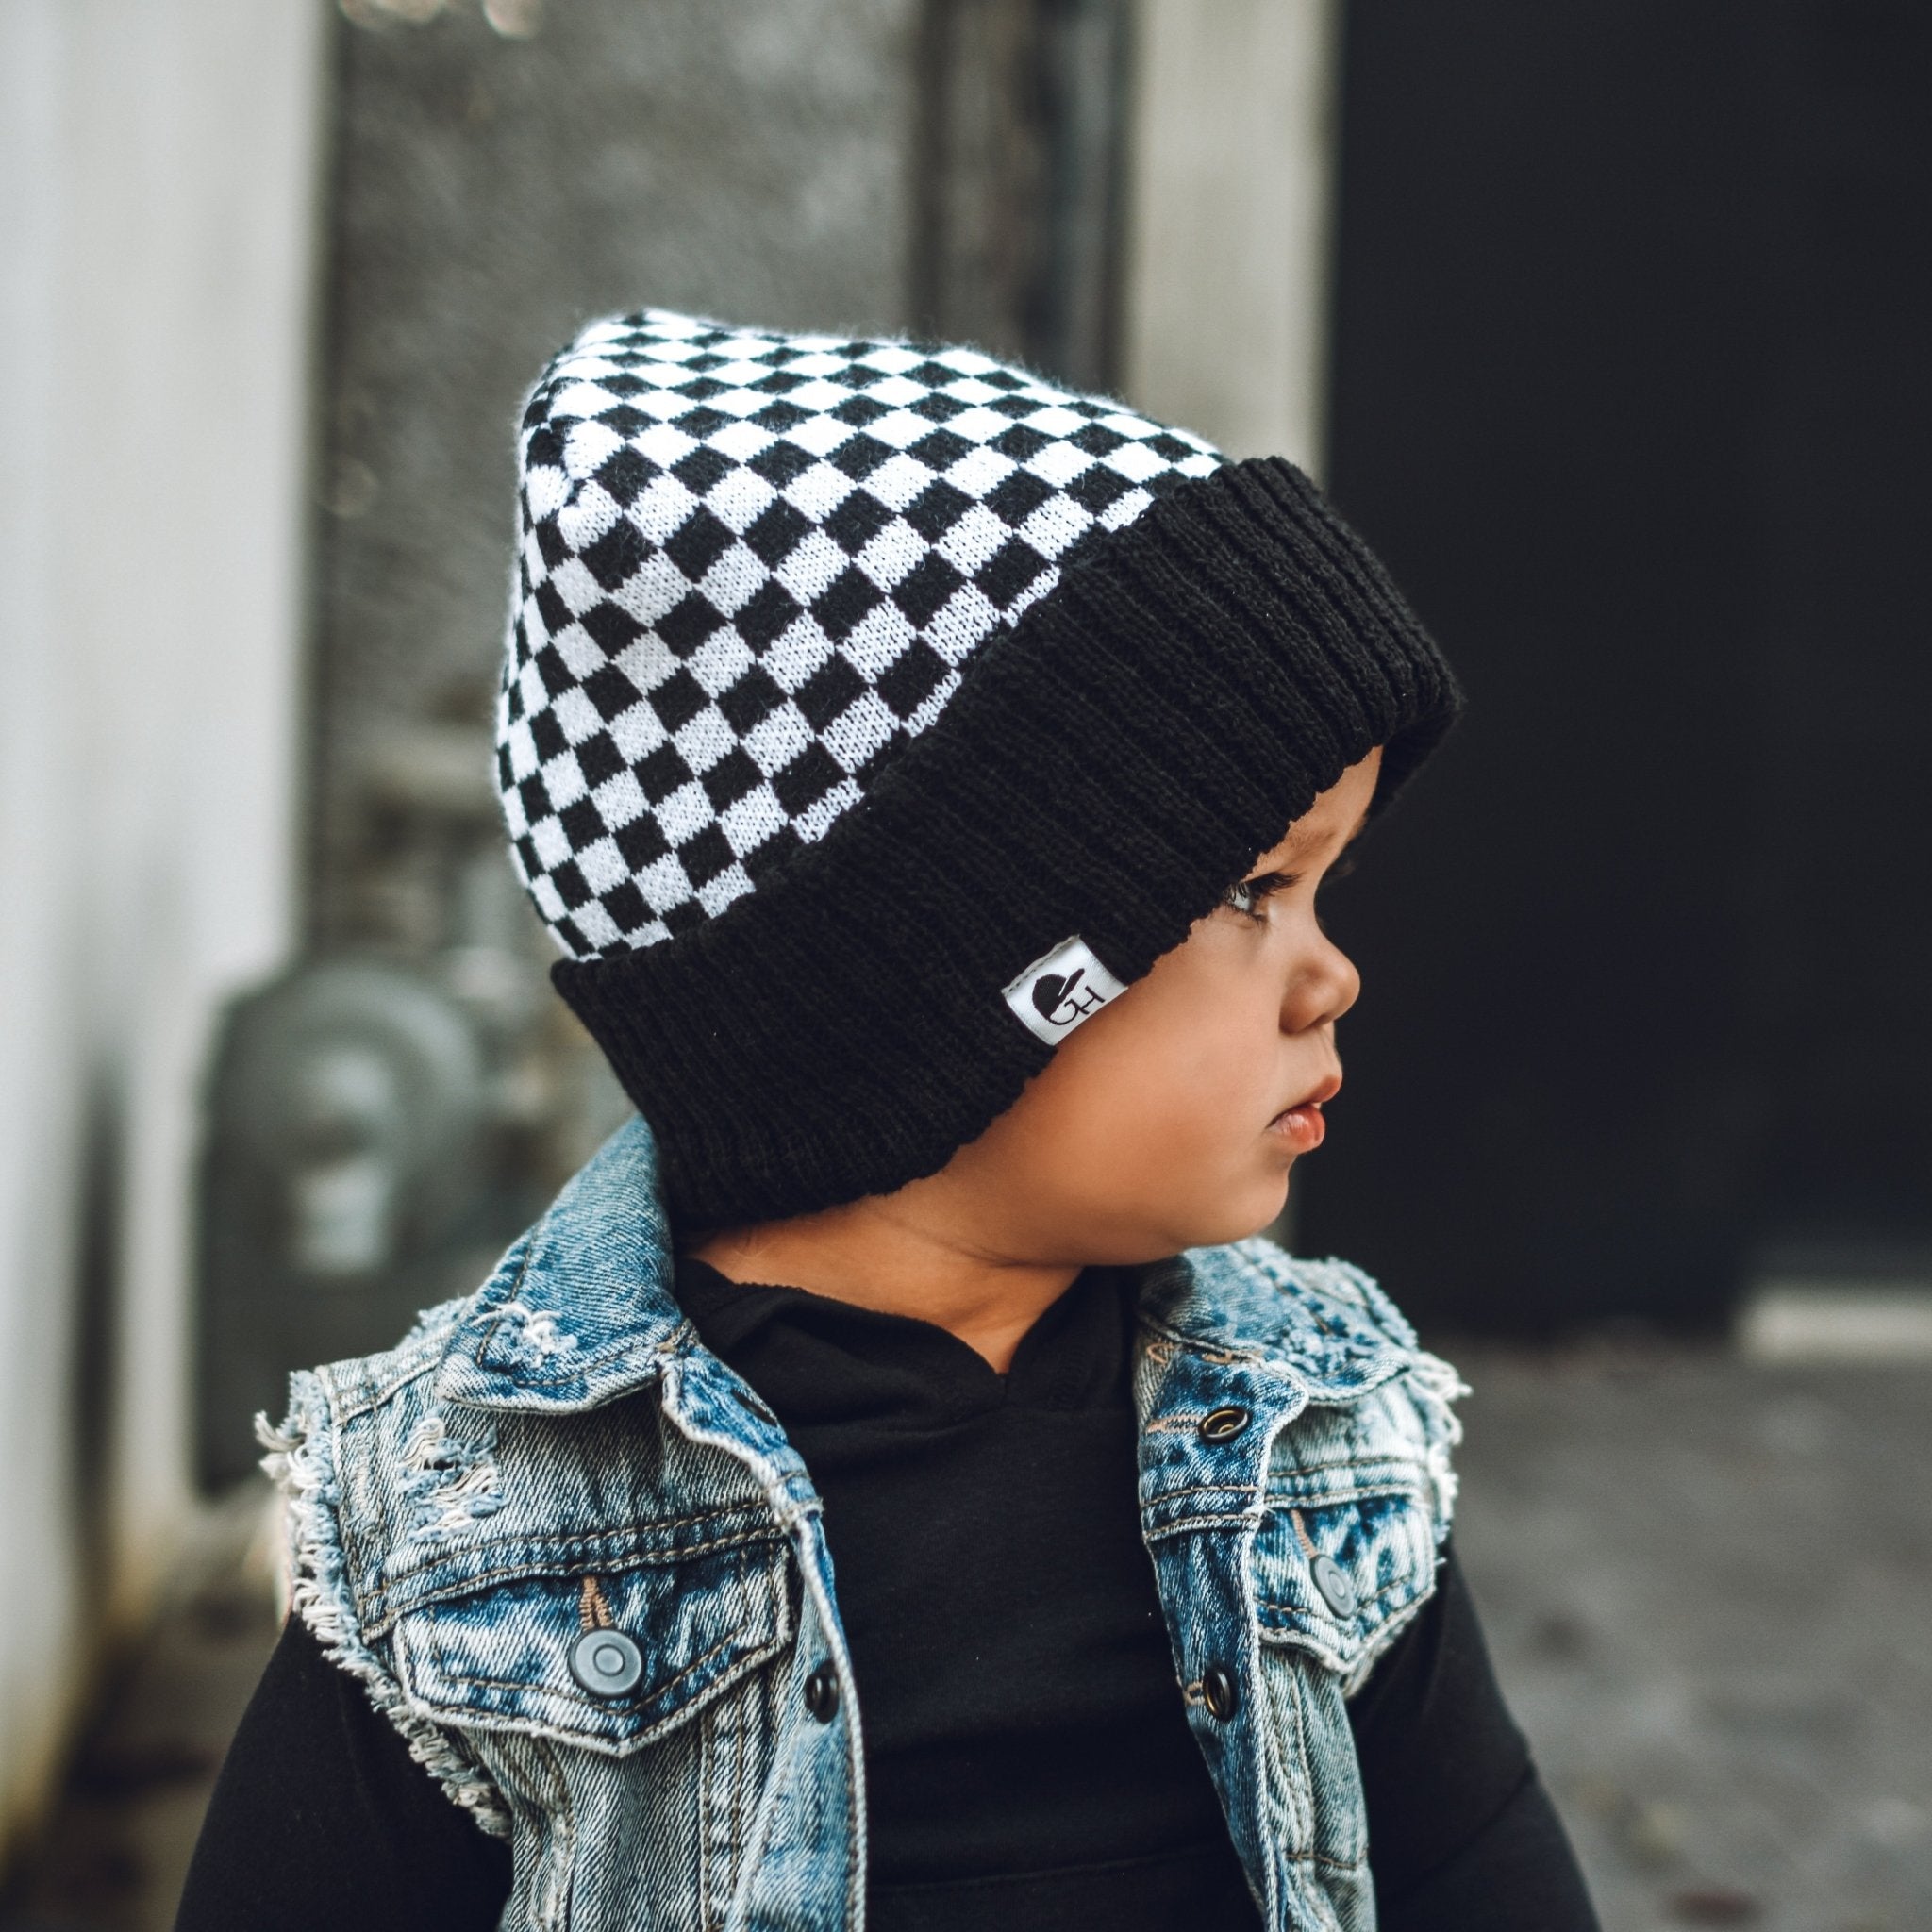 image of a baby wearing a jean jacket and the check Beanie - George Hats boys winter hats